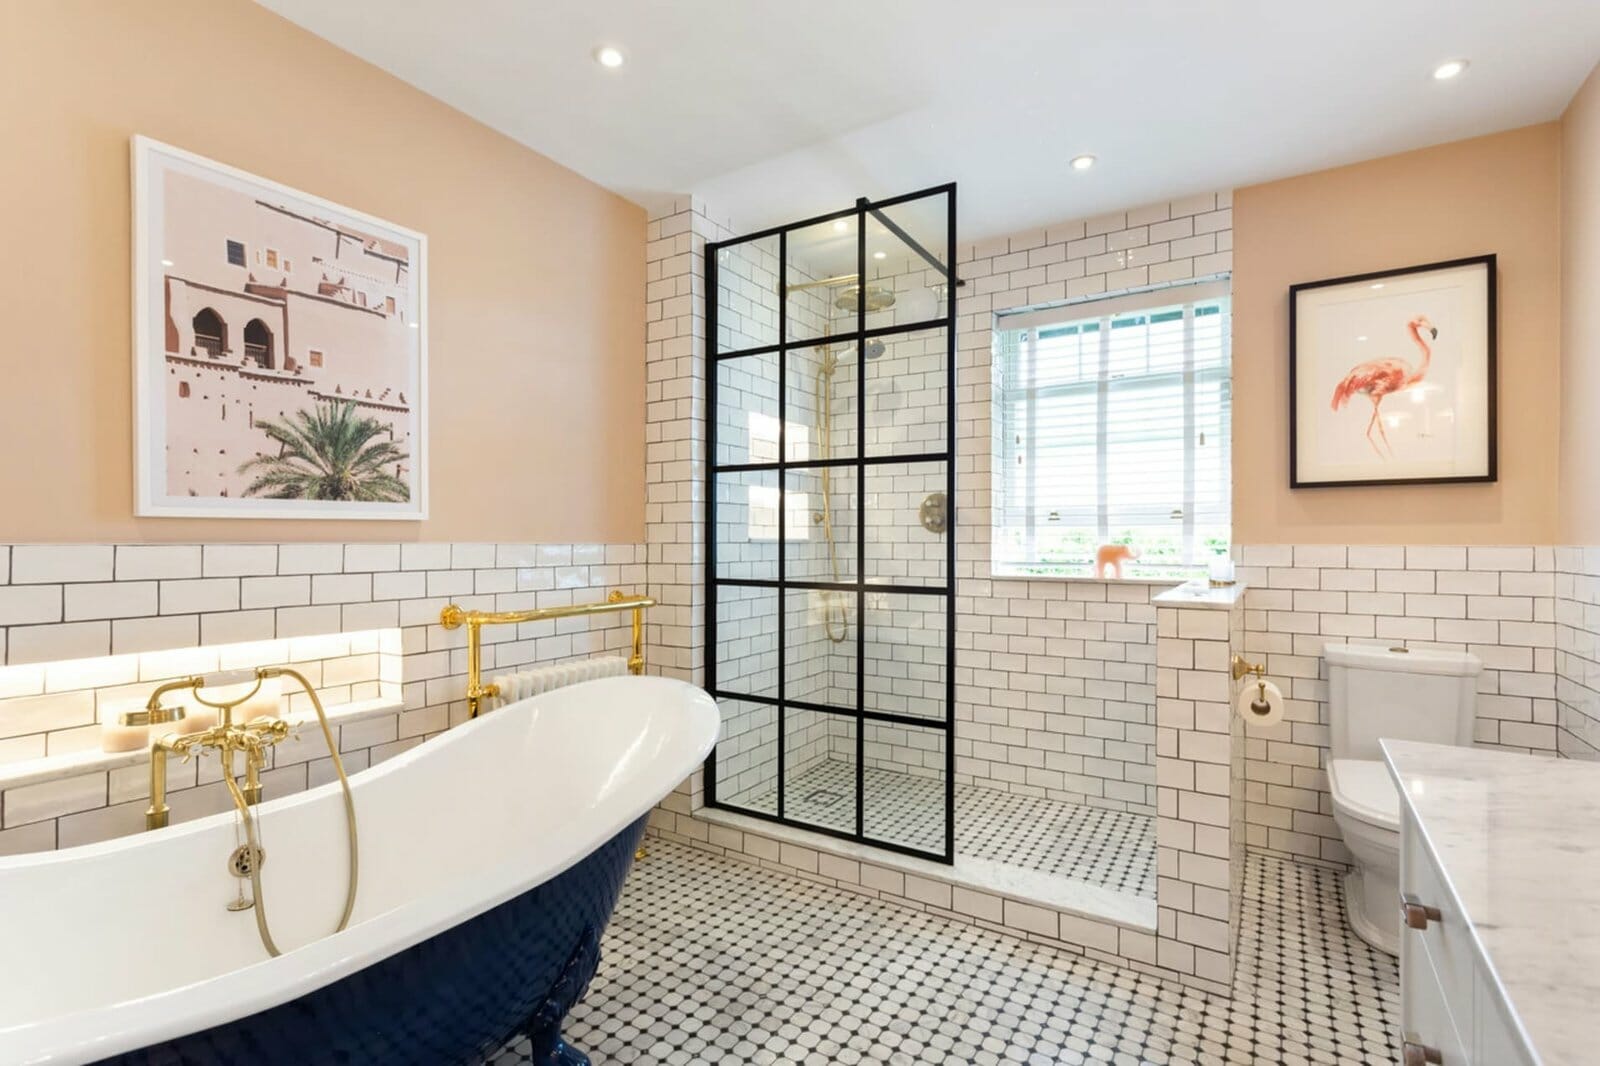 20 Bathroom Tile Ideas You'll Want to Steal   Decorilla